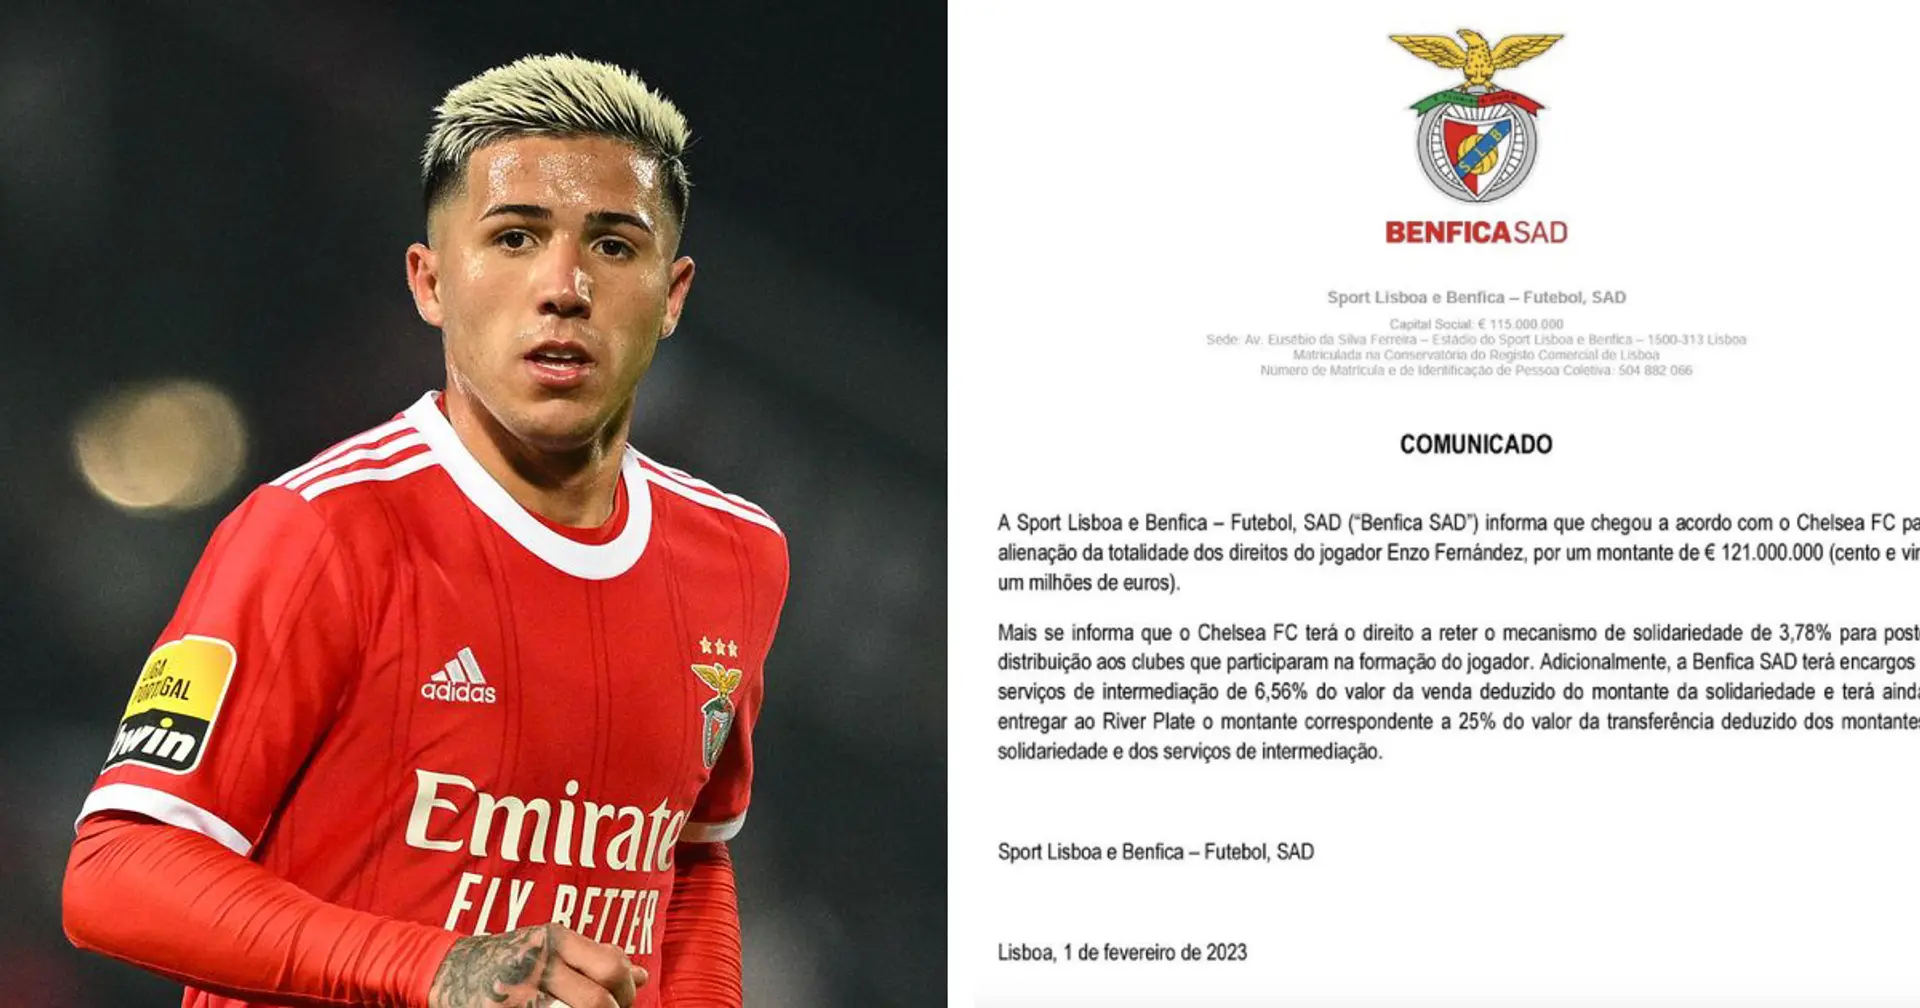 Benfica confirm record-breaking agreement for Enzo Fernandez with Chelsea — transfer still not official yet